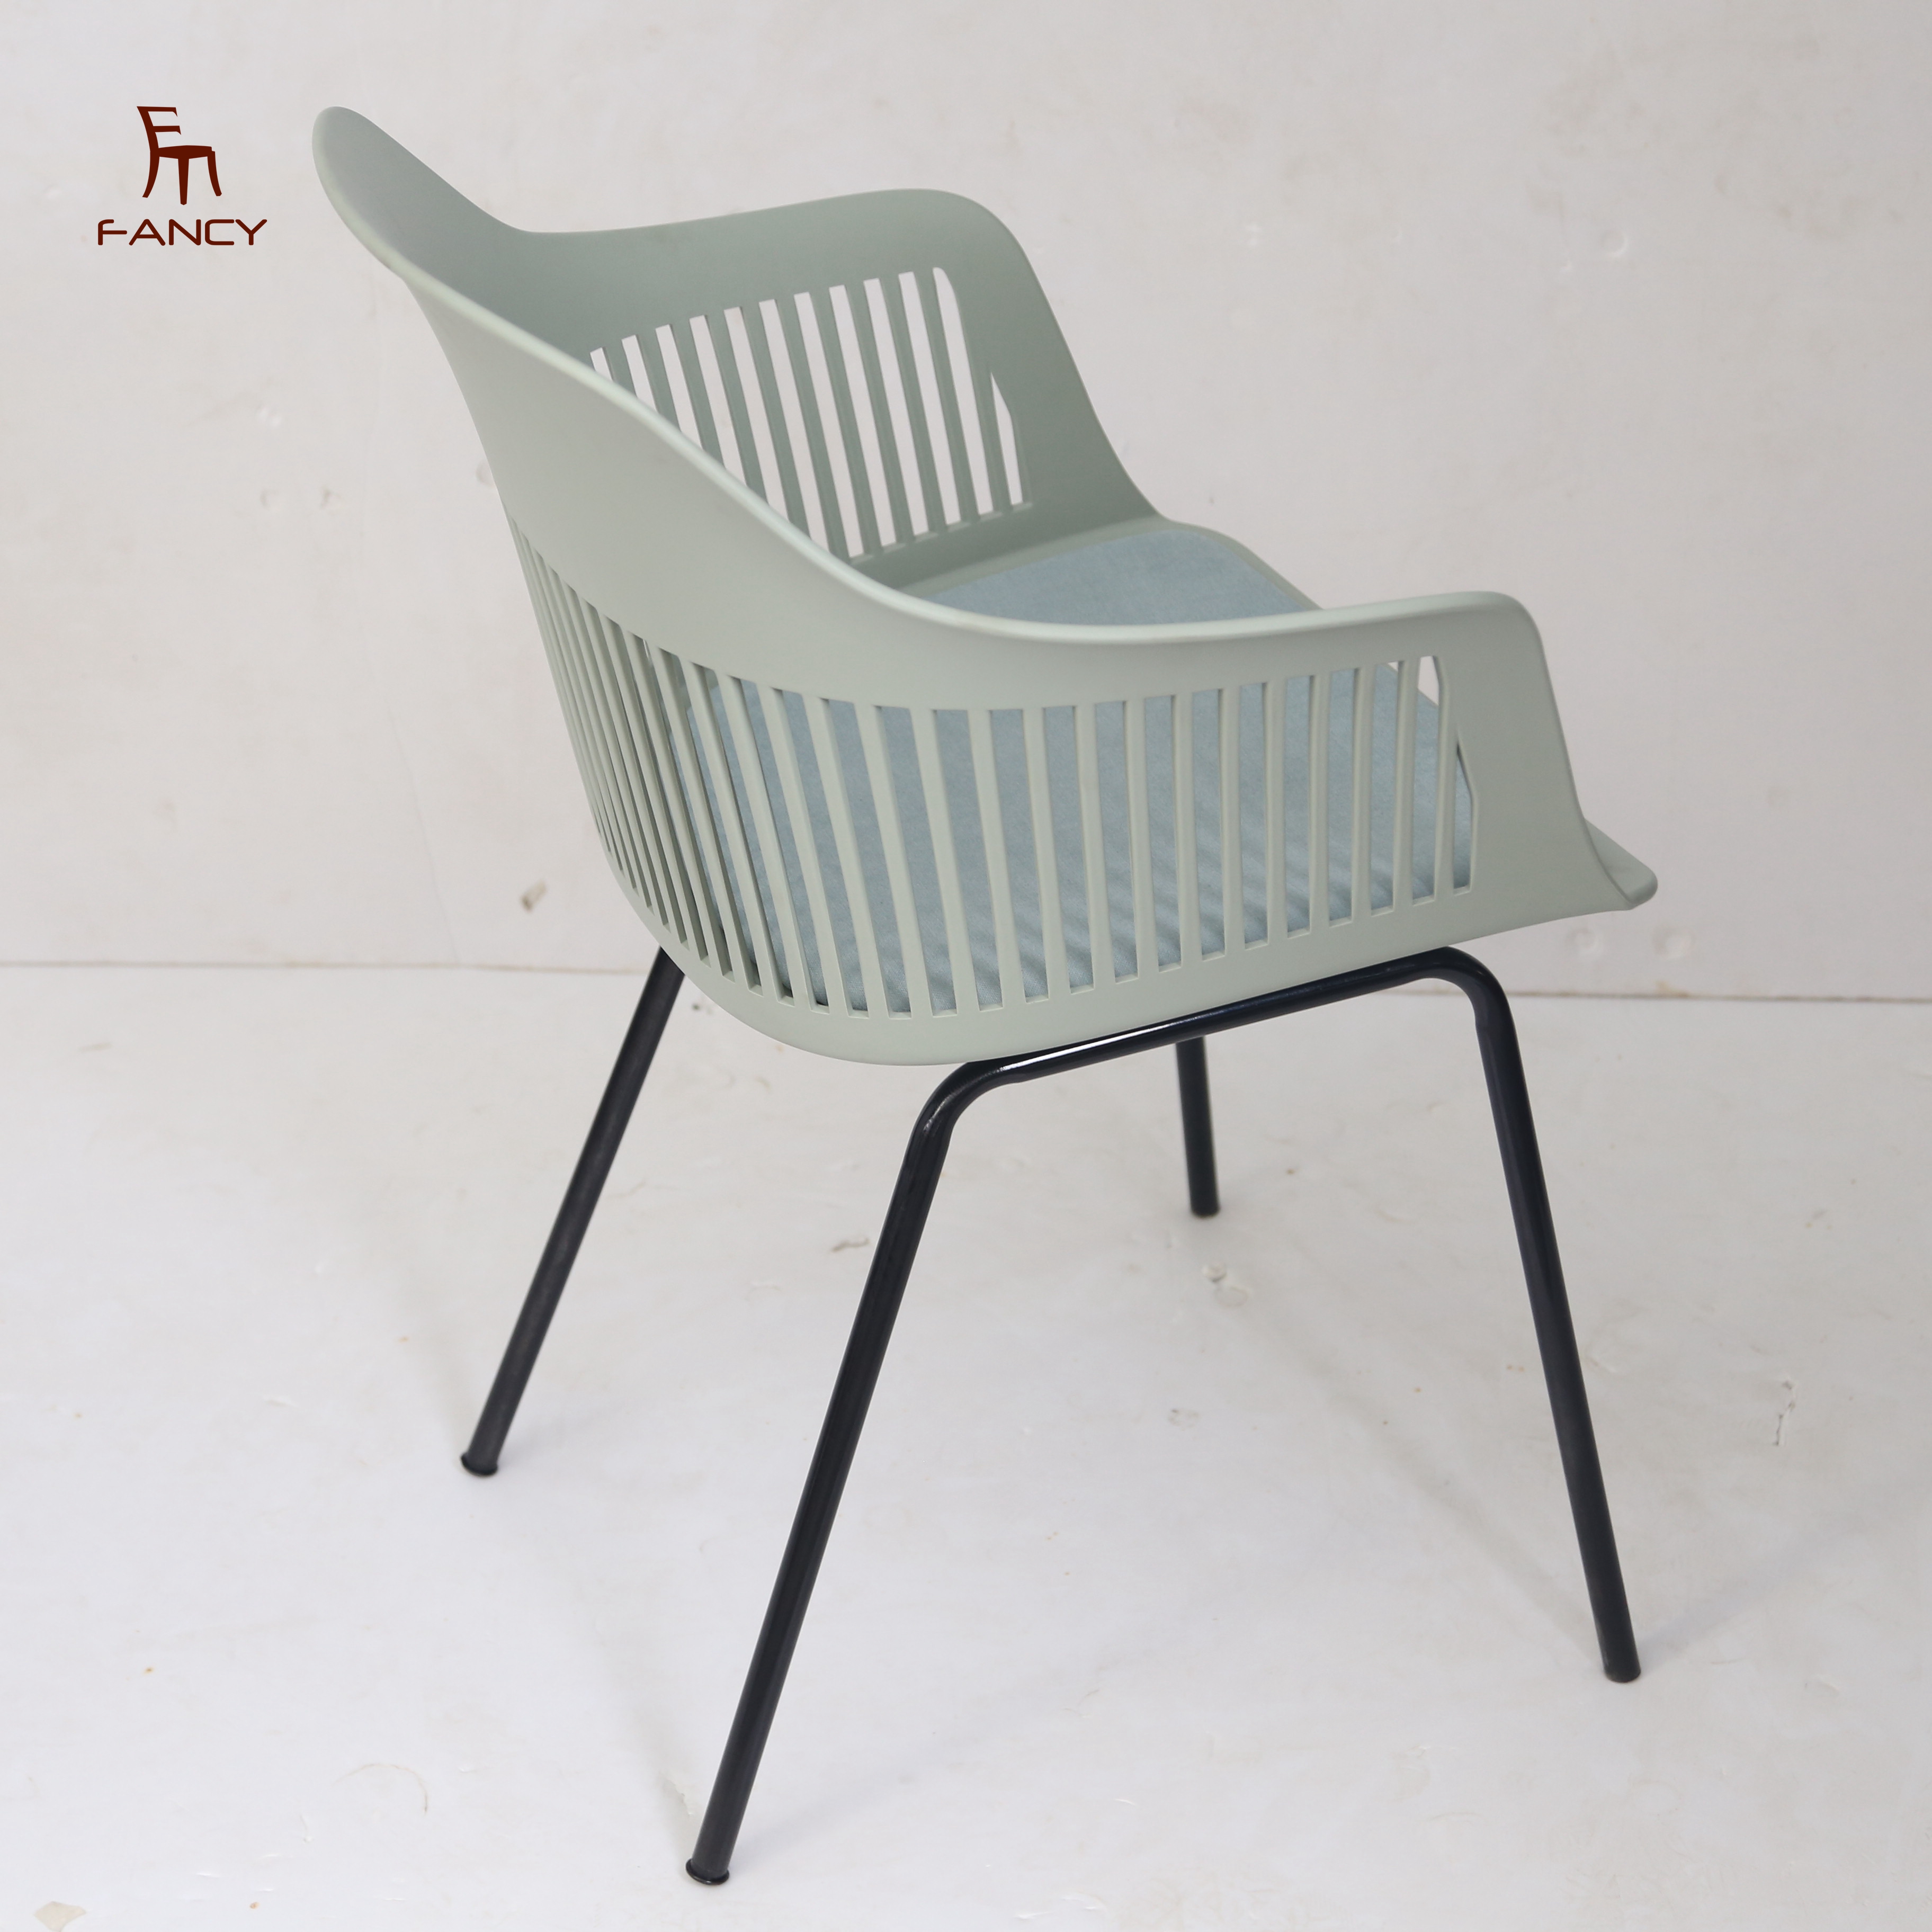 Hot Sale Leisure Chair With Metal Leg PP Dining Chair Living Room Plastic chair